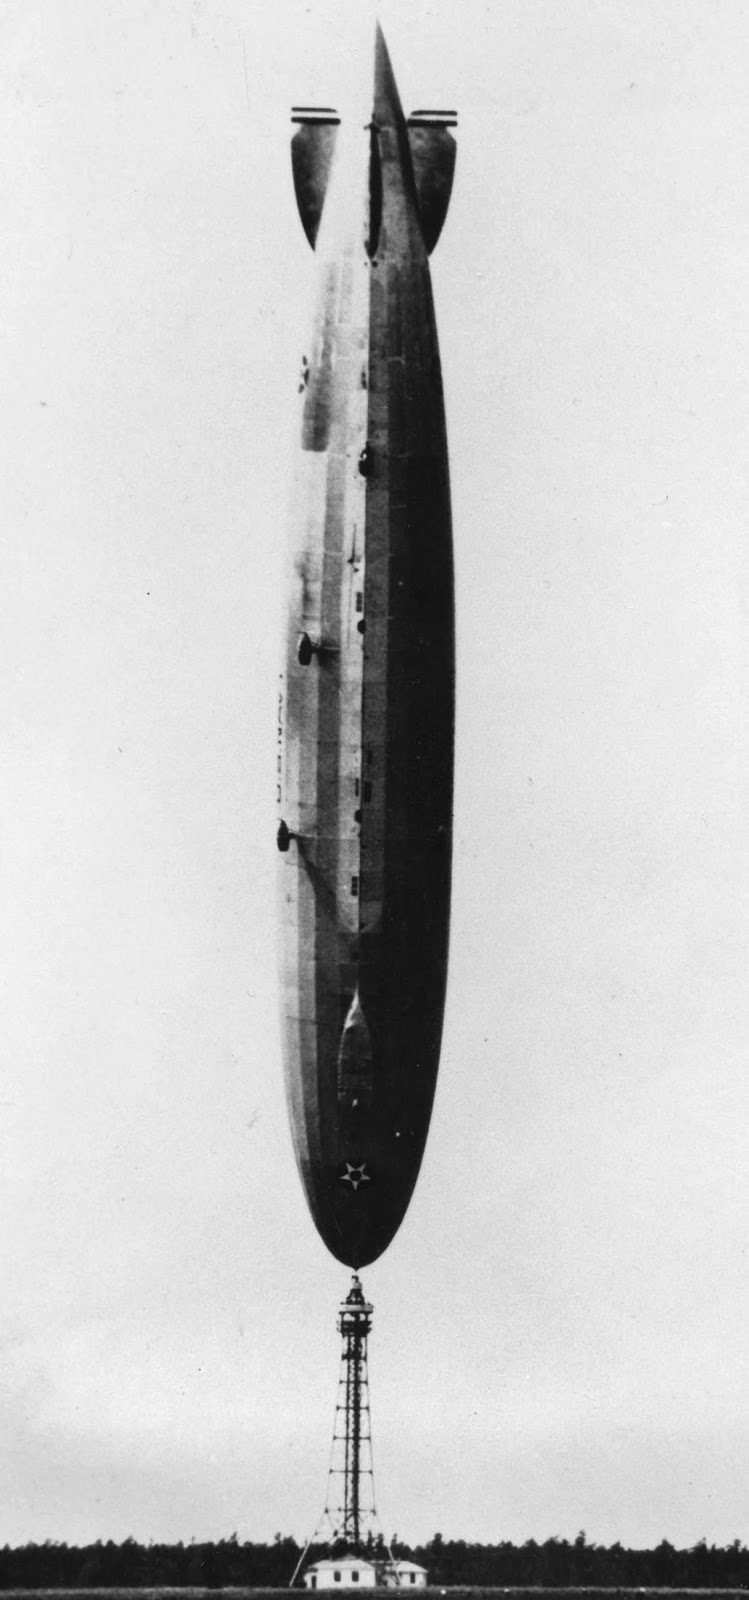 The U.S. Navy's dirigible Los Angeles, upended after a turbulent wind from the Atlantic flipped the 700-foot airship on its nose at Lakehurst, New Jersey, in 1926. The ship slowly righted itself and there were no serious injuries to the crew of 25.